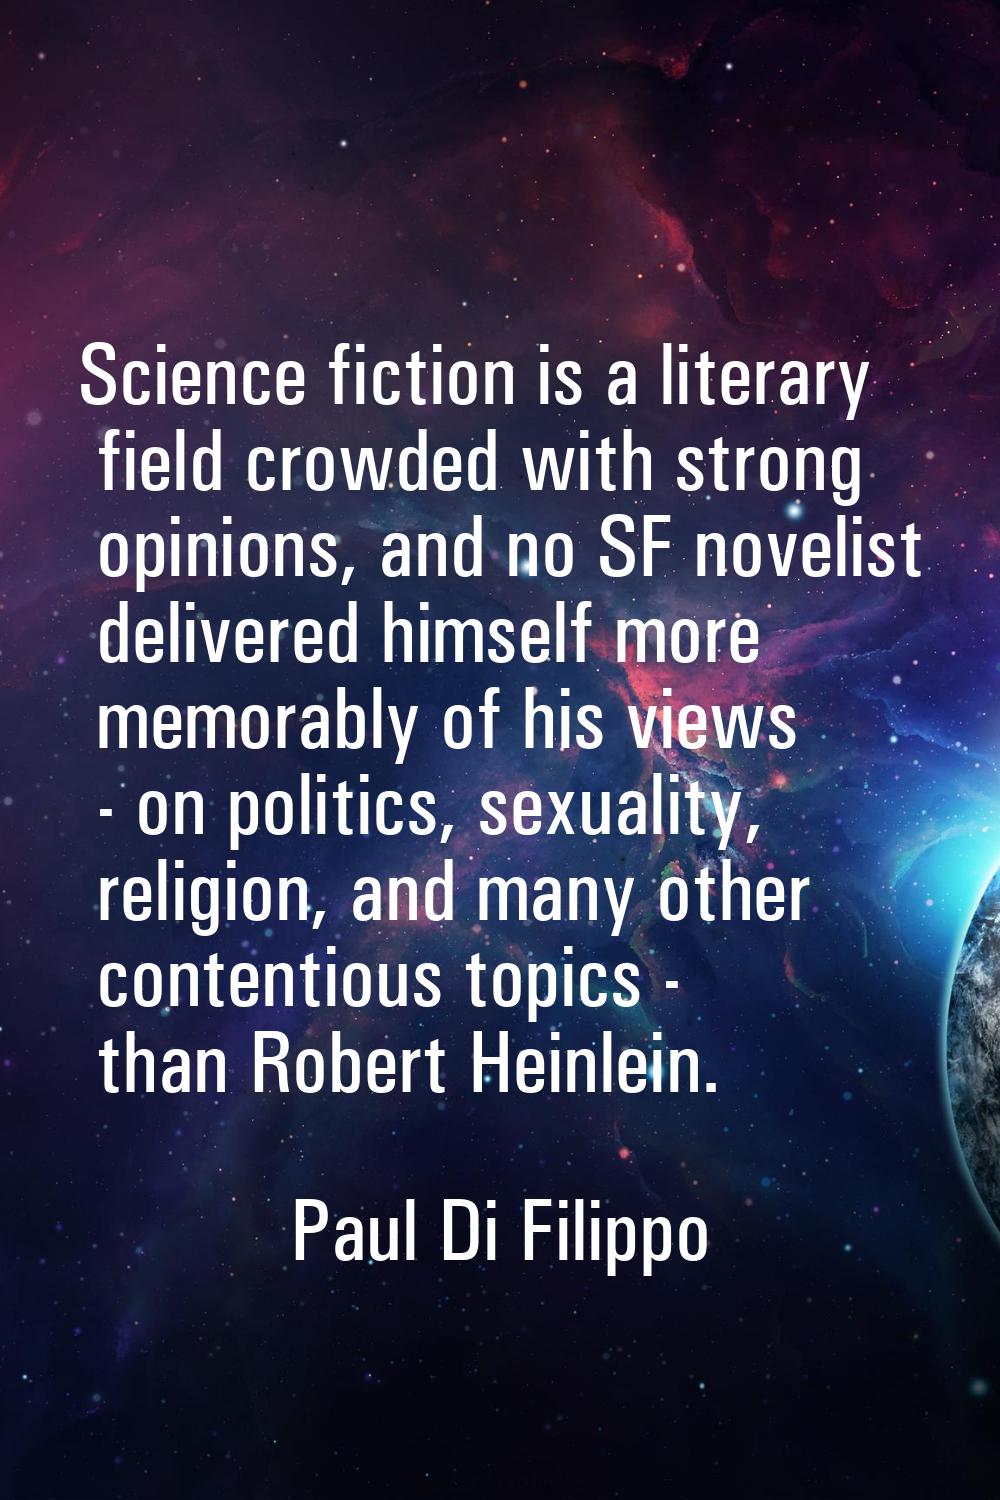 Science fiction is a literary field crowded with strong opinions, and no SF novelist delivered hims